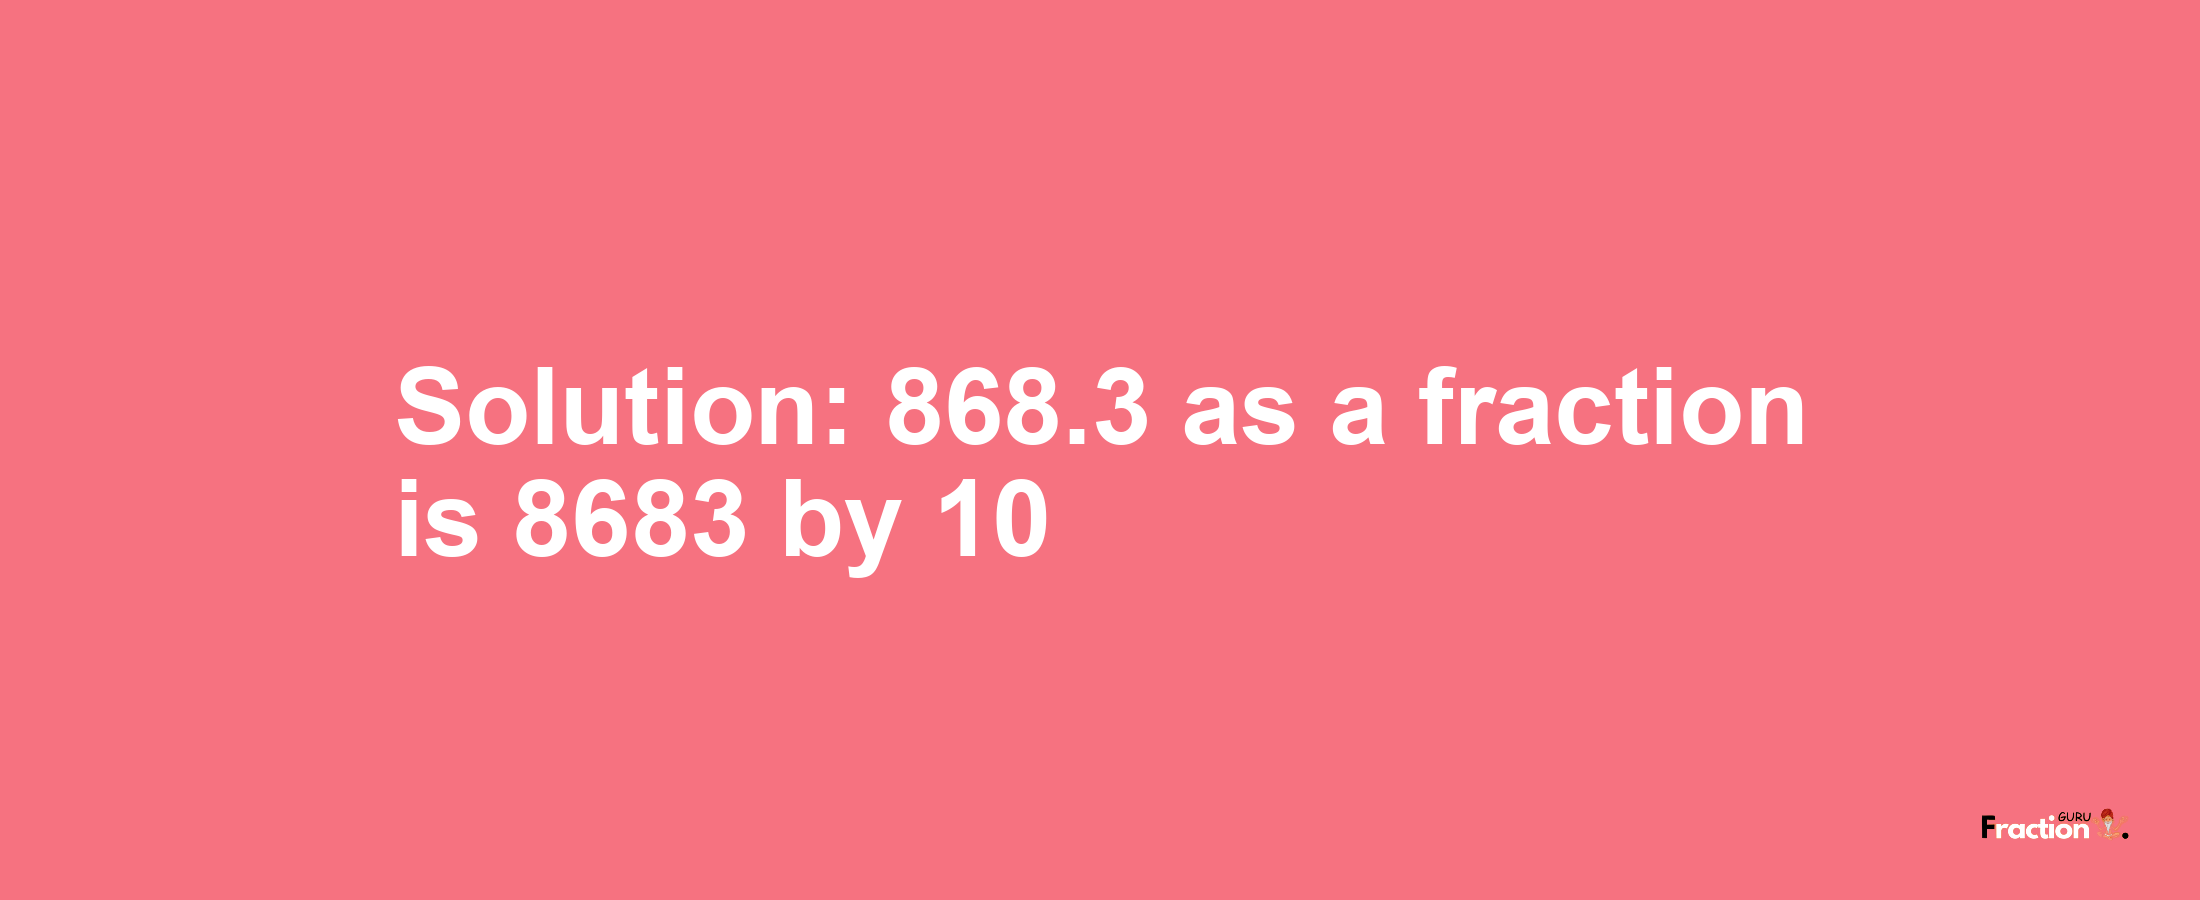 Solution:868.3 as a fraction is 8683/10